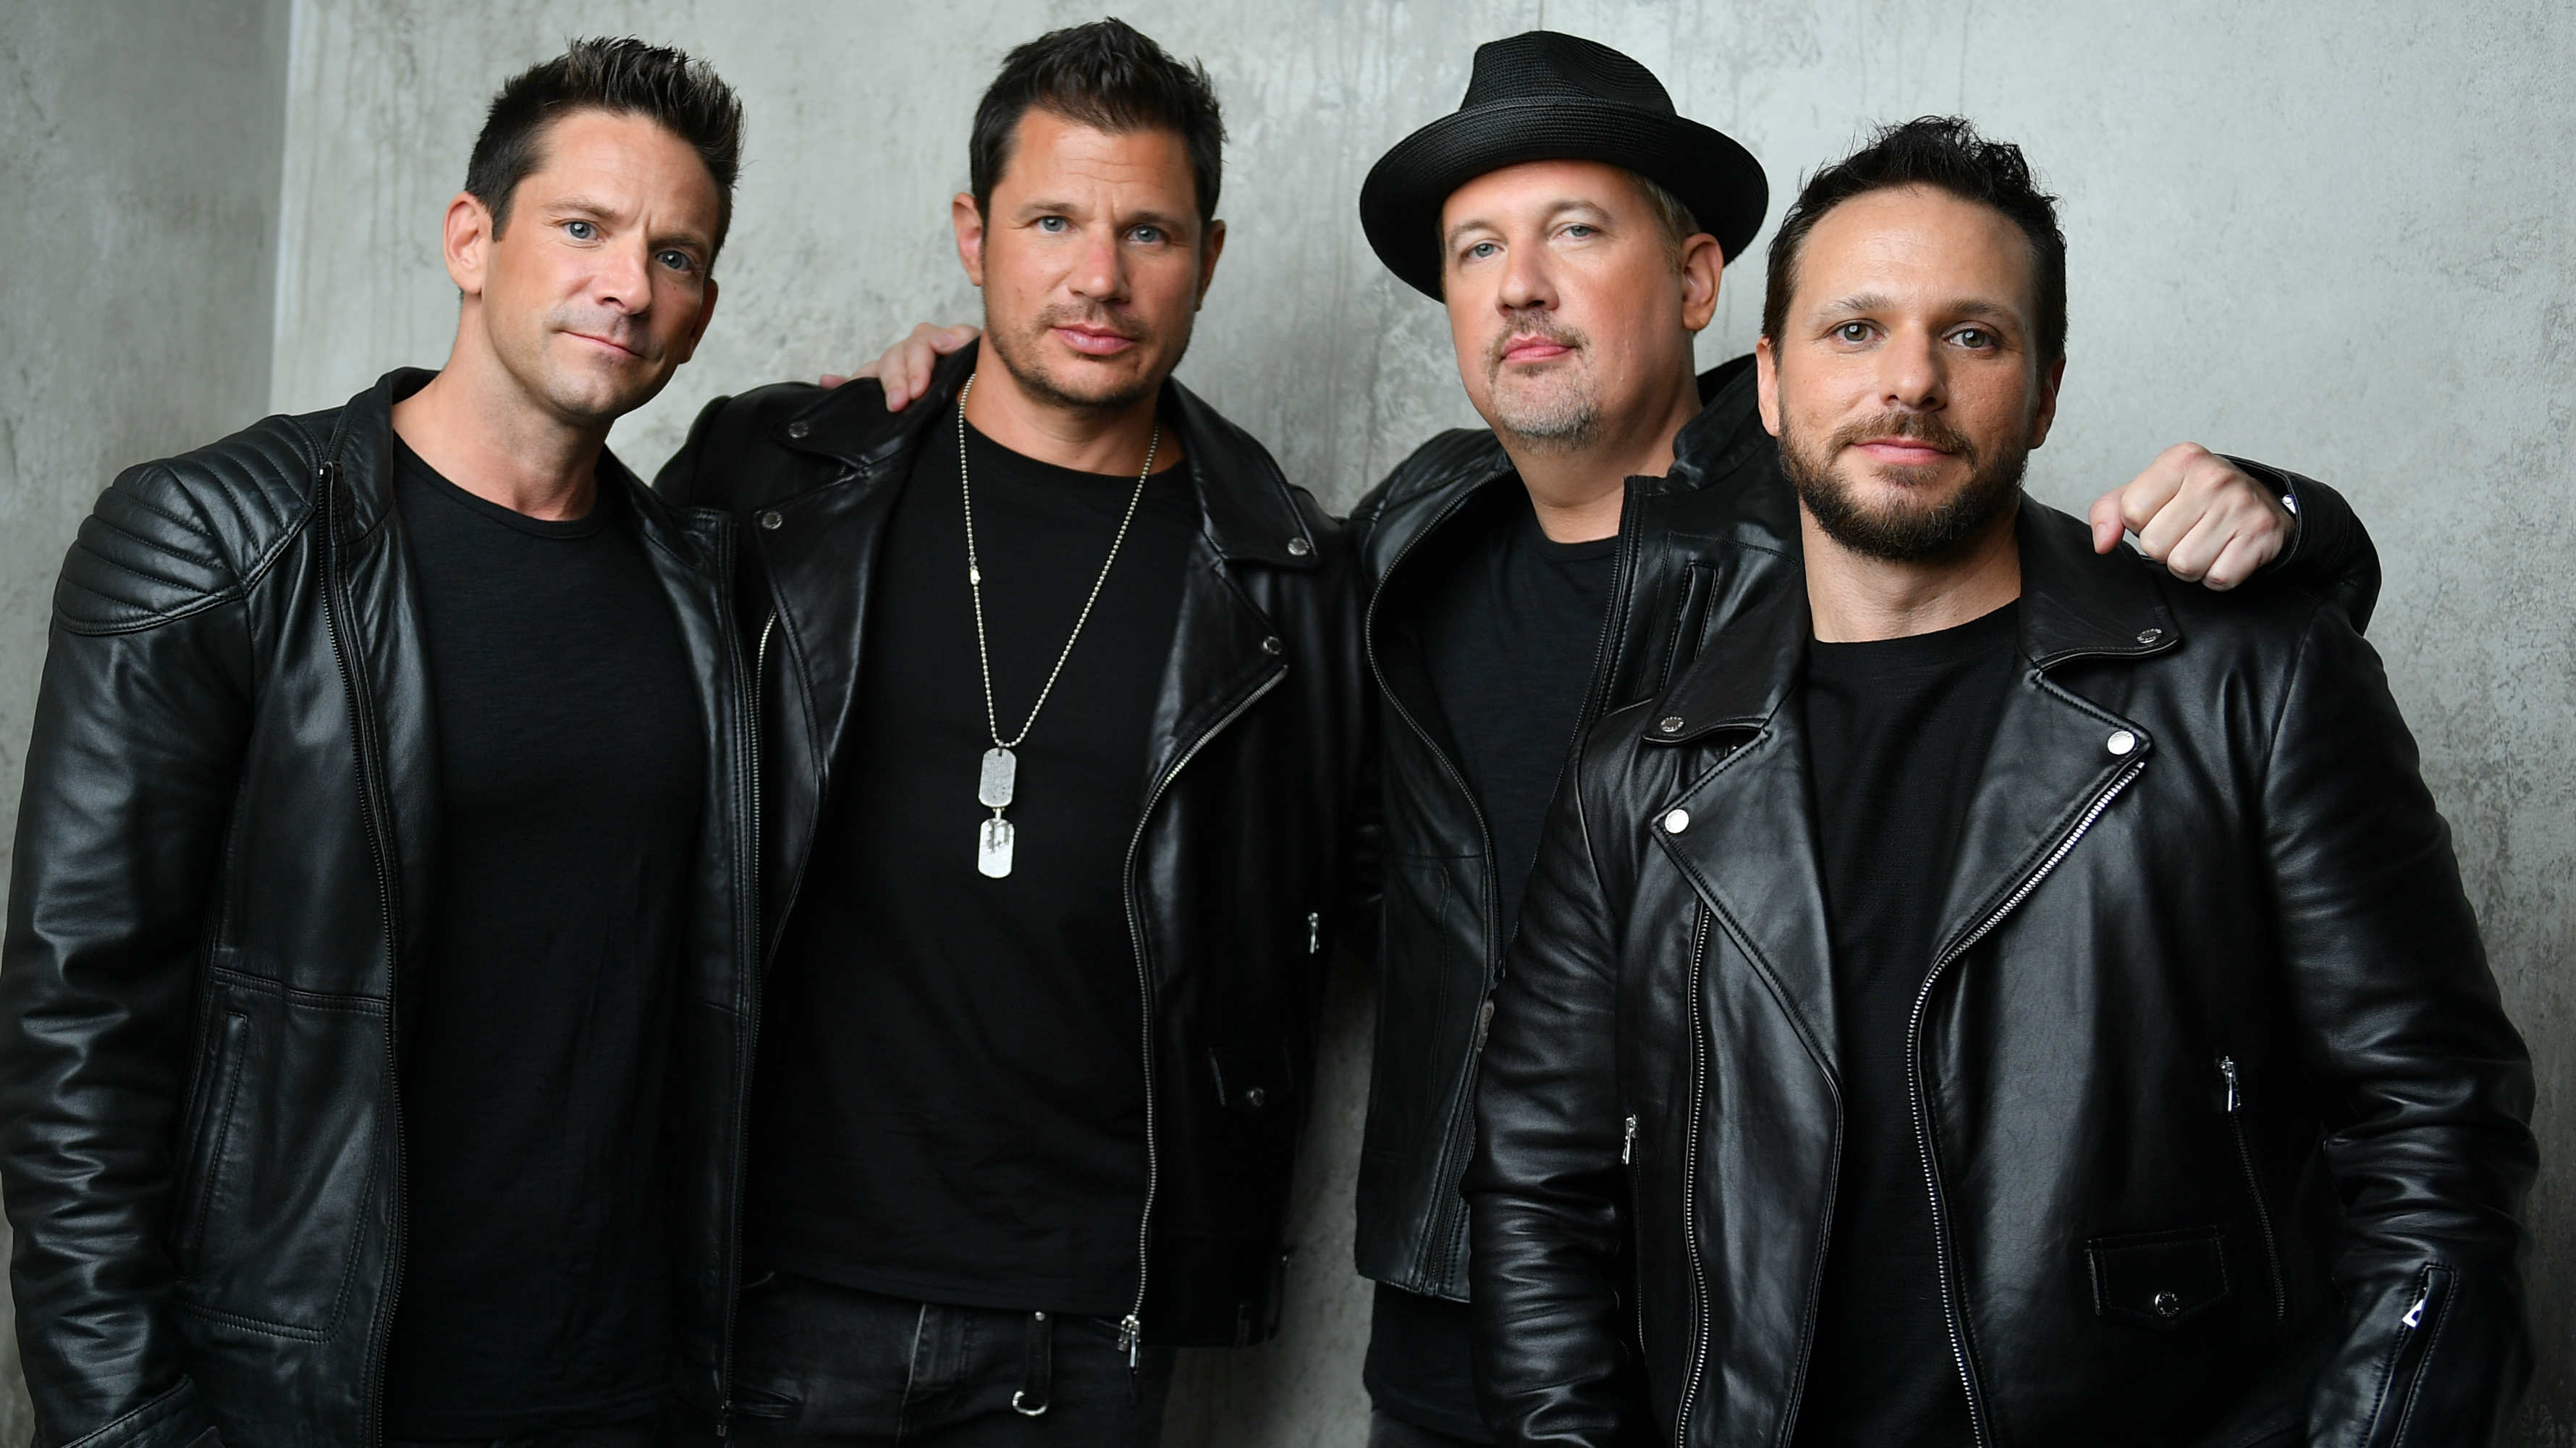 From left, Jeff Timmons, Nick Lachey, Justin Jeffre, Drew Lachey. Photo: LAMC Productions 